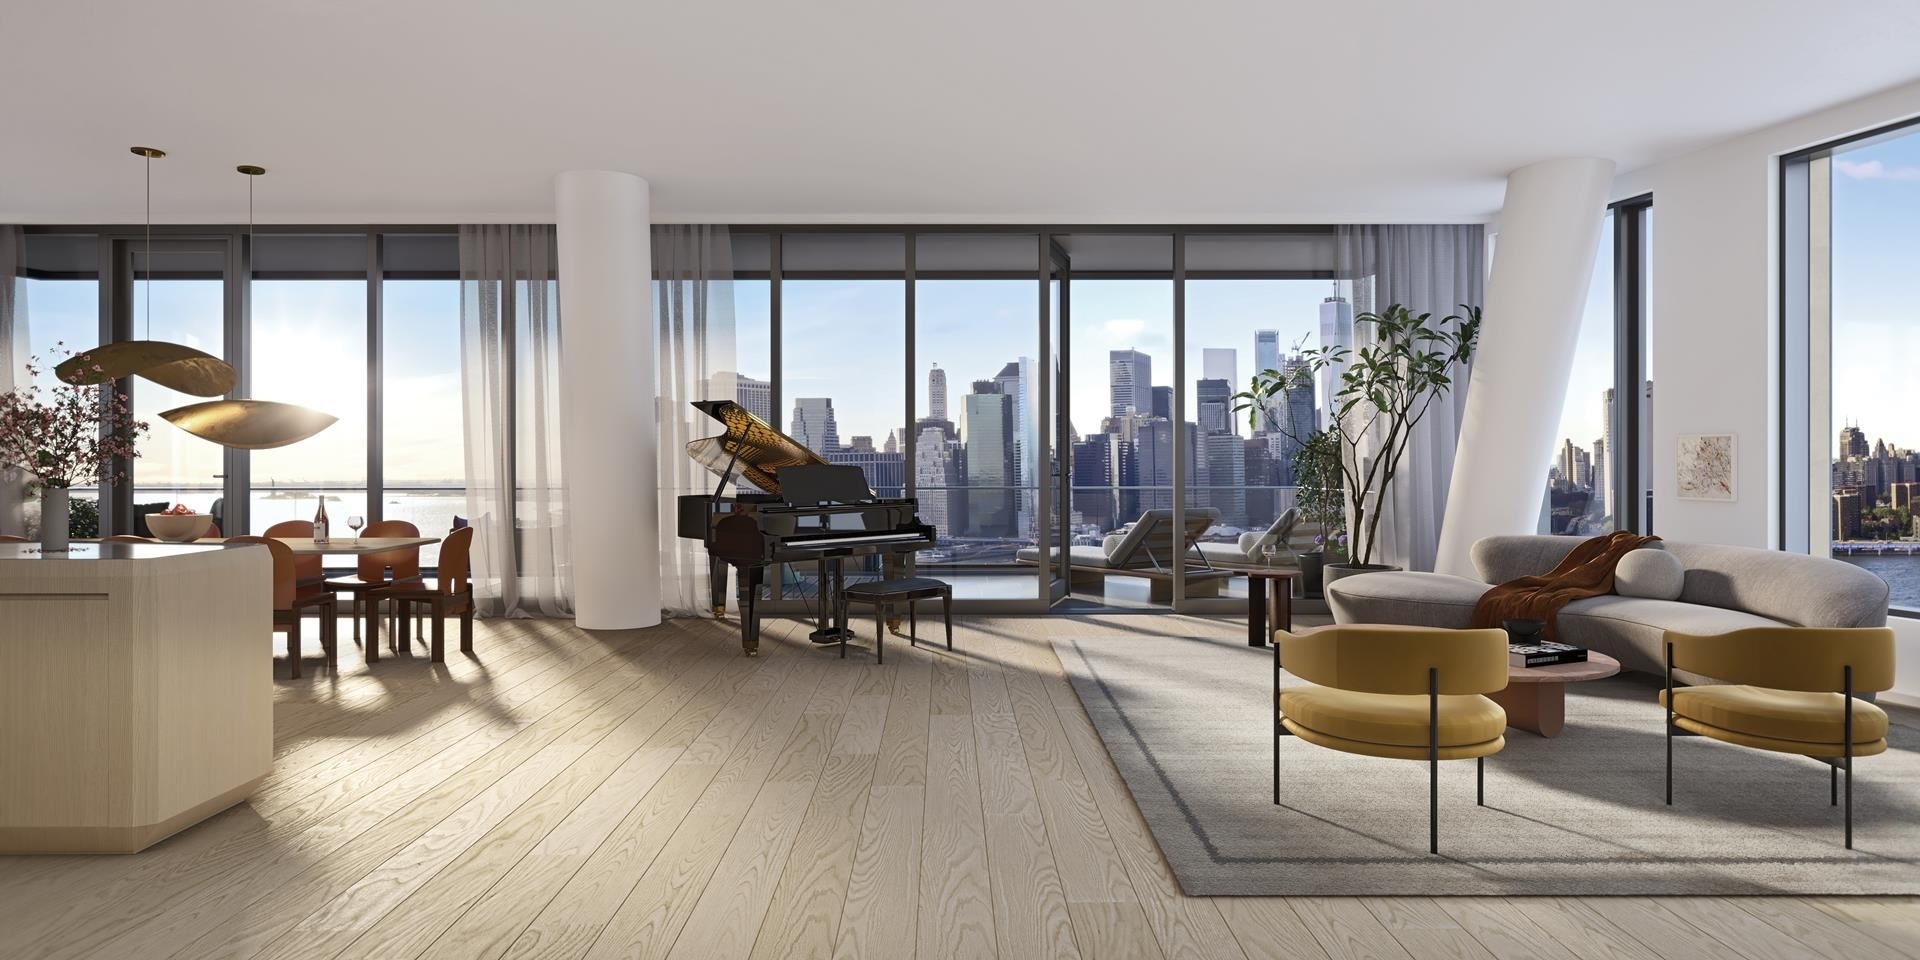 Condominium for Sale at Olympia Dumbo, 30 FRONT ST, 26A Brooklyn, NY 11201